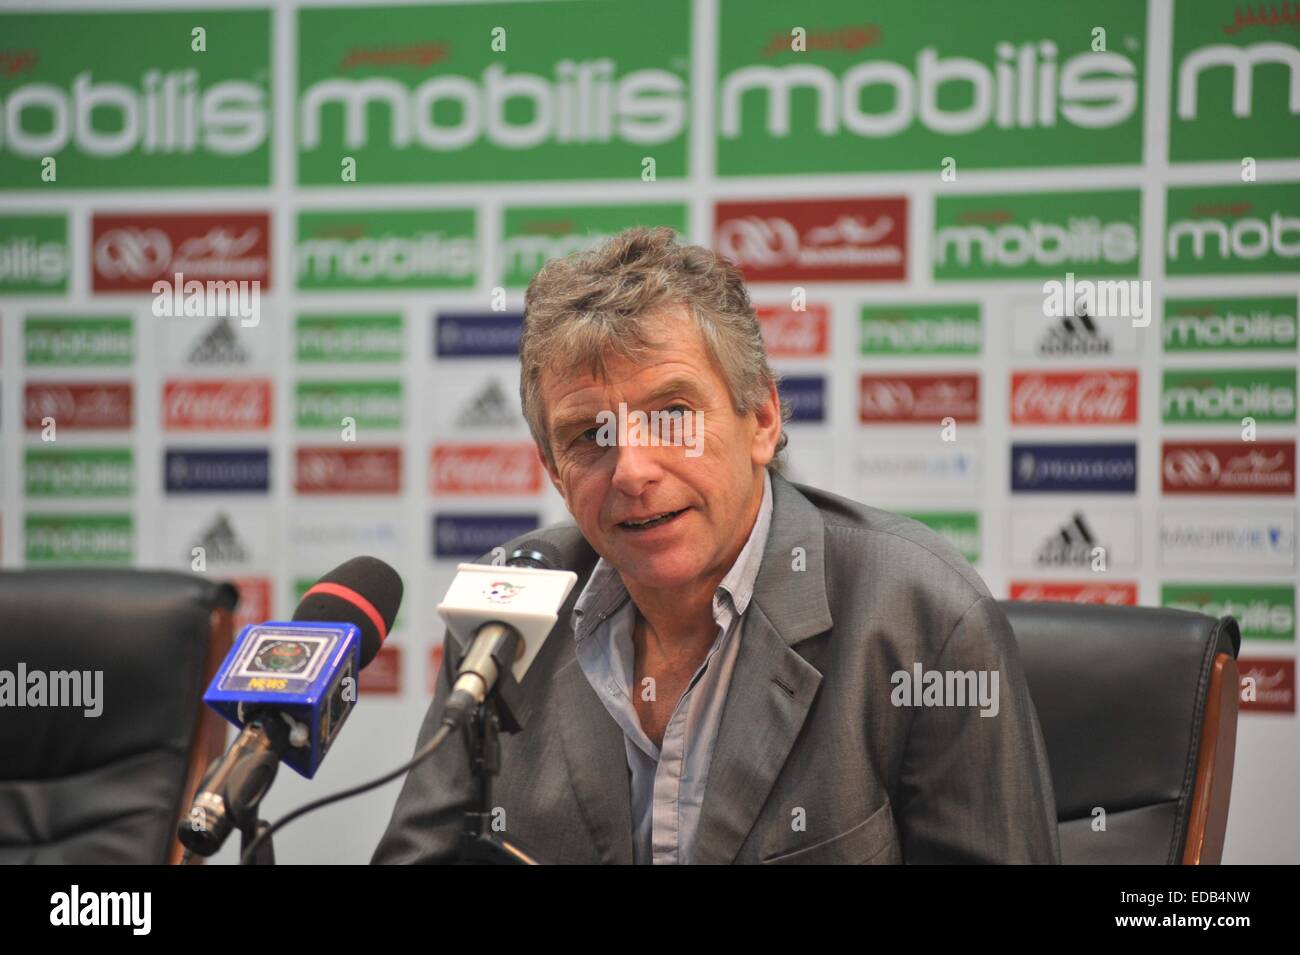 Algiers. 5th Jan, 2015. Algerian national football team head coach Christian Gourcuff answers questions about the upcoming Africa Cup of Nations during a news conference in Algiers, capital of Algeria, Jan. 4, 2015. The 2015 Africa Cup of Nations will be held in Equatorial Guinea from Jan. 17 to Feb. 8. © Xinhua/Alamy Live News Stock Photo